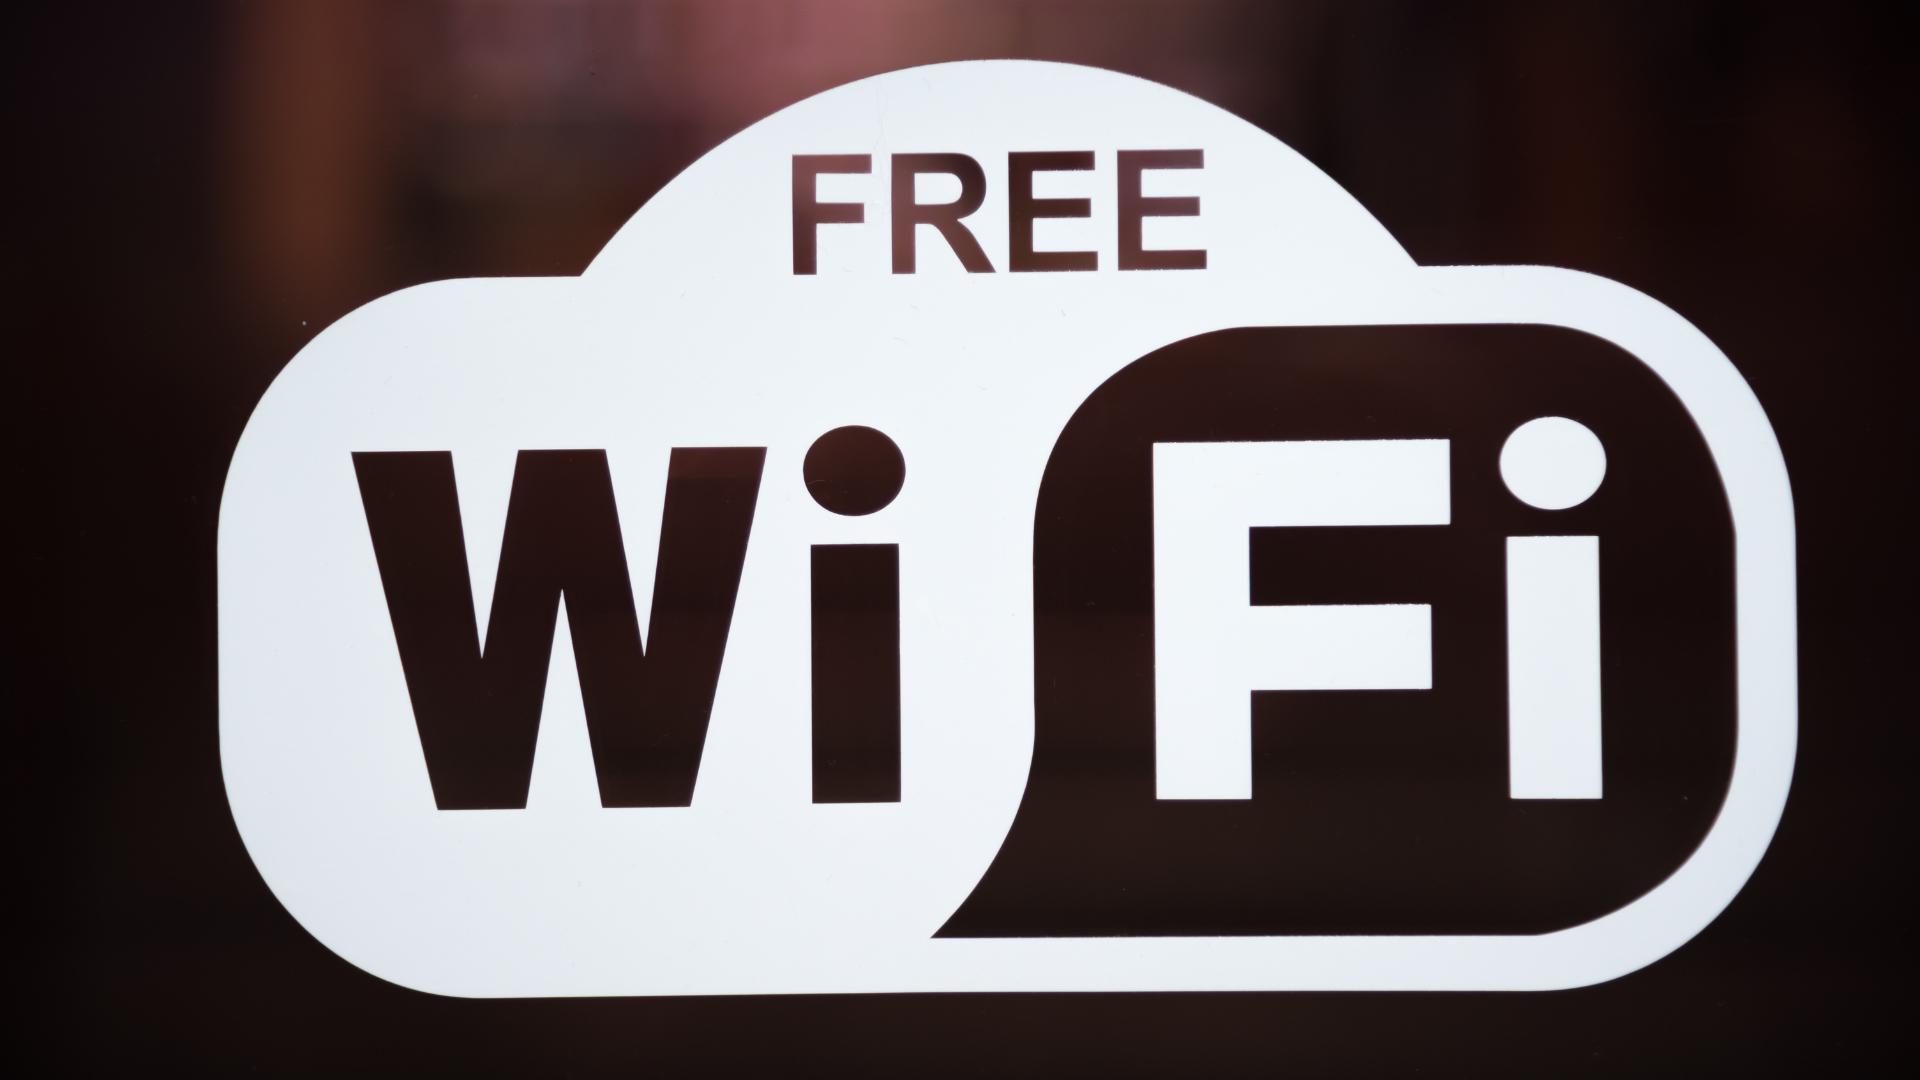 free wi-fi sign in a restaurant